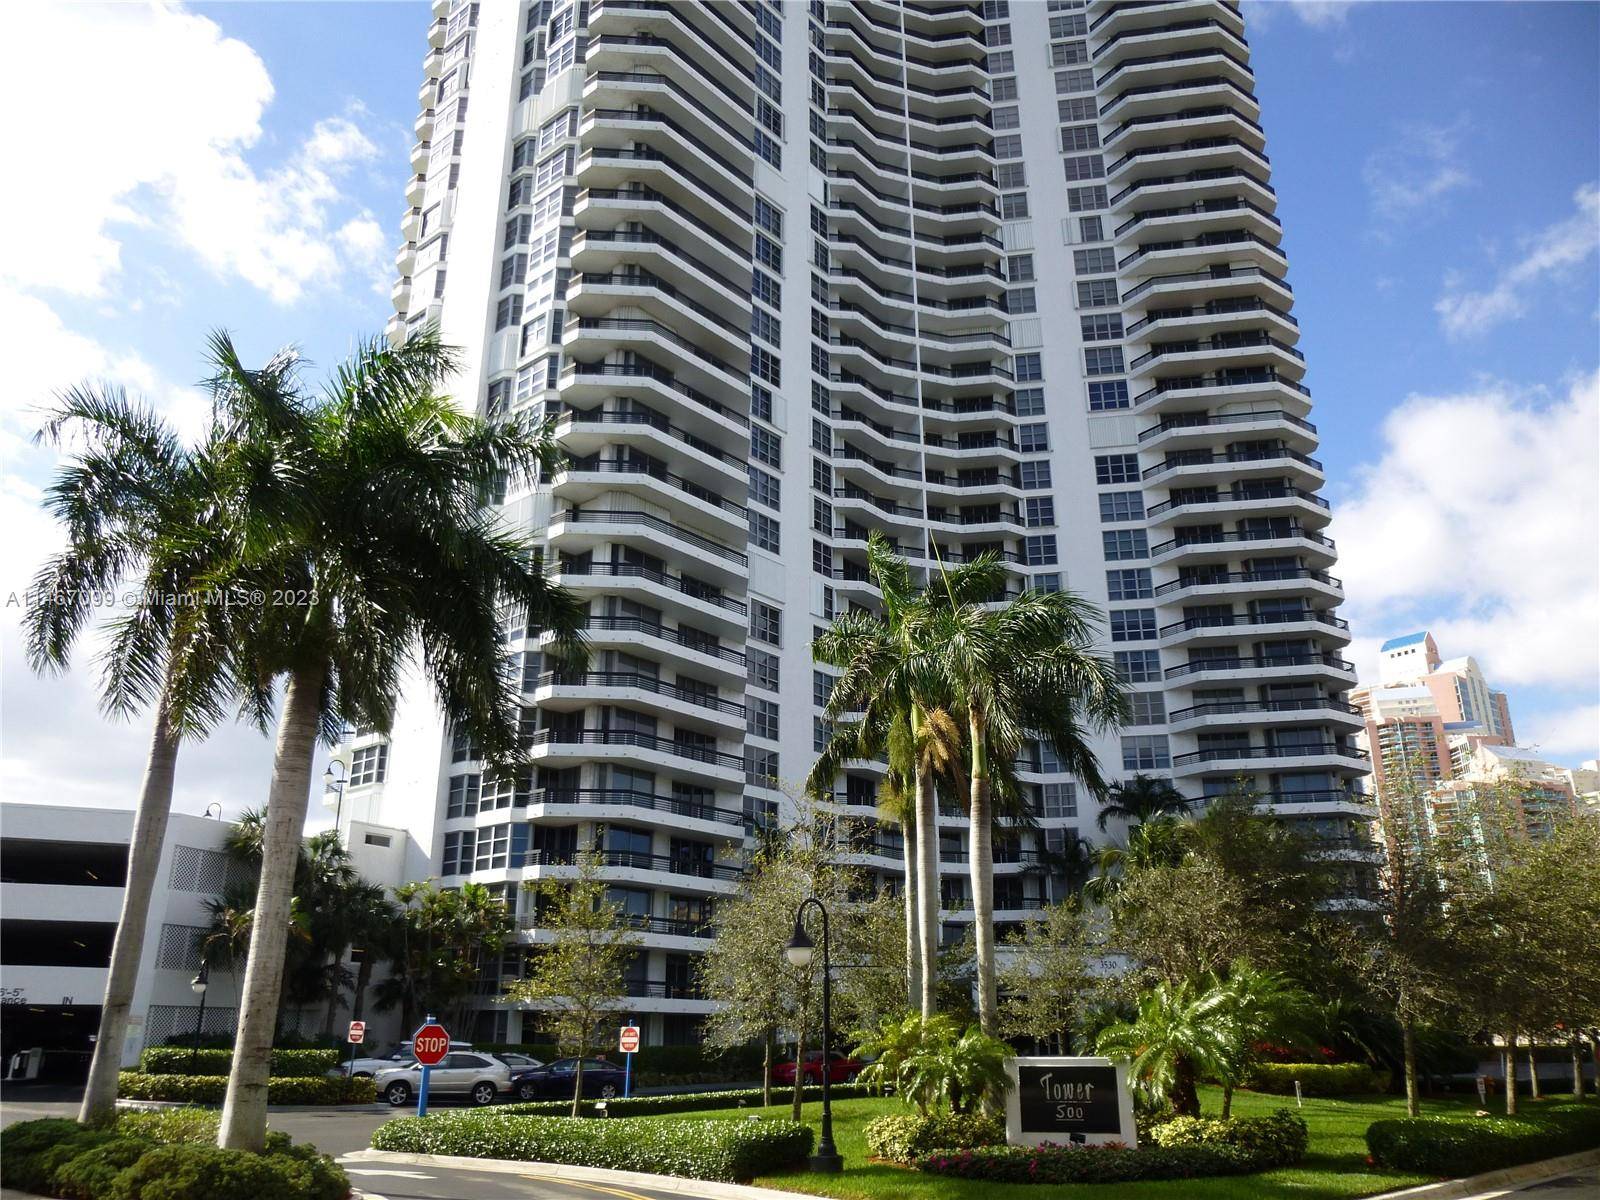 BEAUTIFUL 2 BEDROOMS DEN, 2 BATHS, TILE FLOORS, STAILESS STEEL APPLIANCES, BEAUTIFUL VIEWS OF OCEAN, CORNER UNIT, LARGE TERRACE, VERY HIGH FLOOR, MARINA AND GOLF COURSE, TWO PARKING SPACES, FULL ...